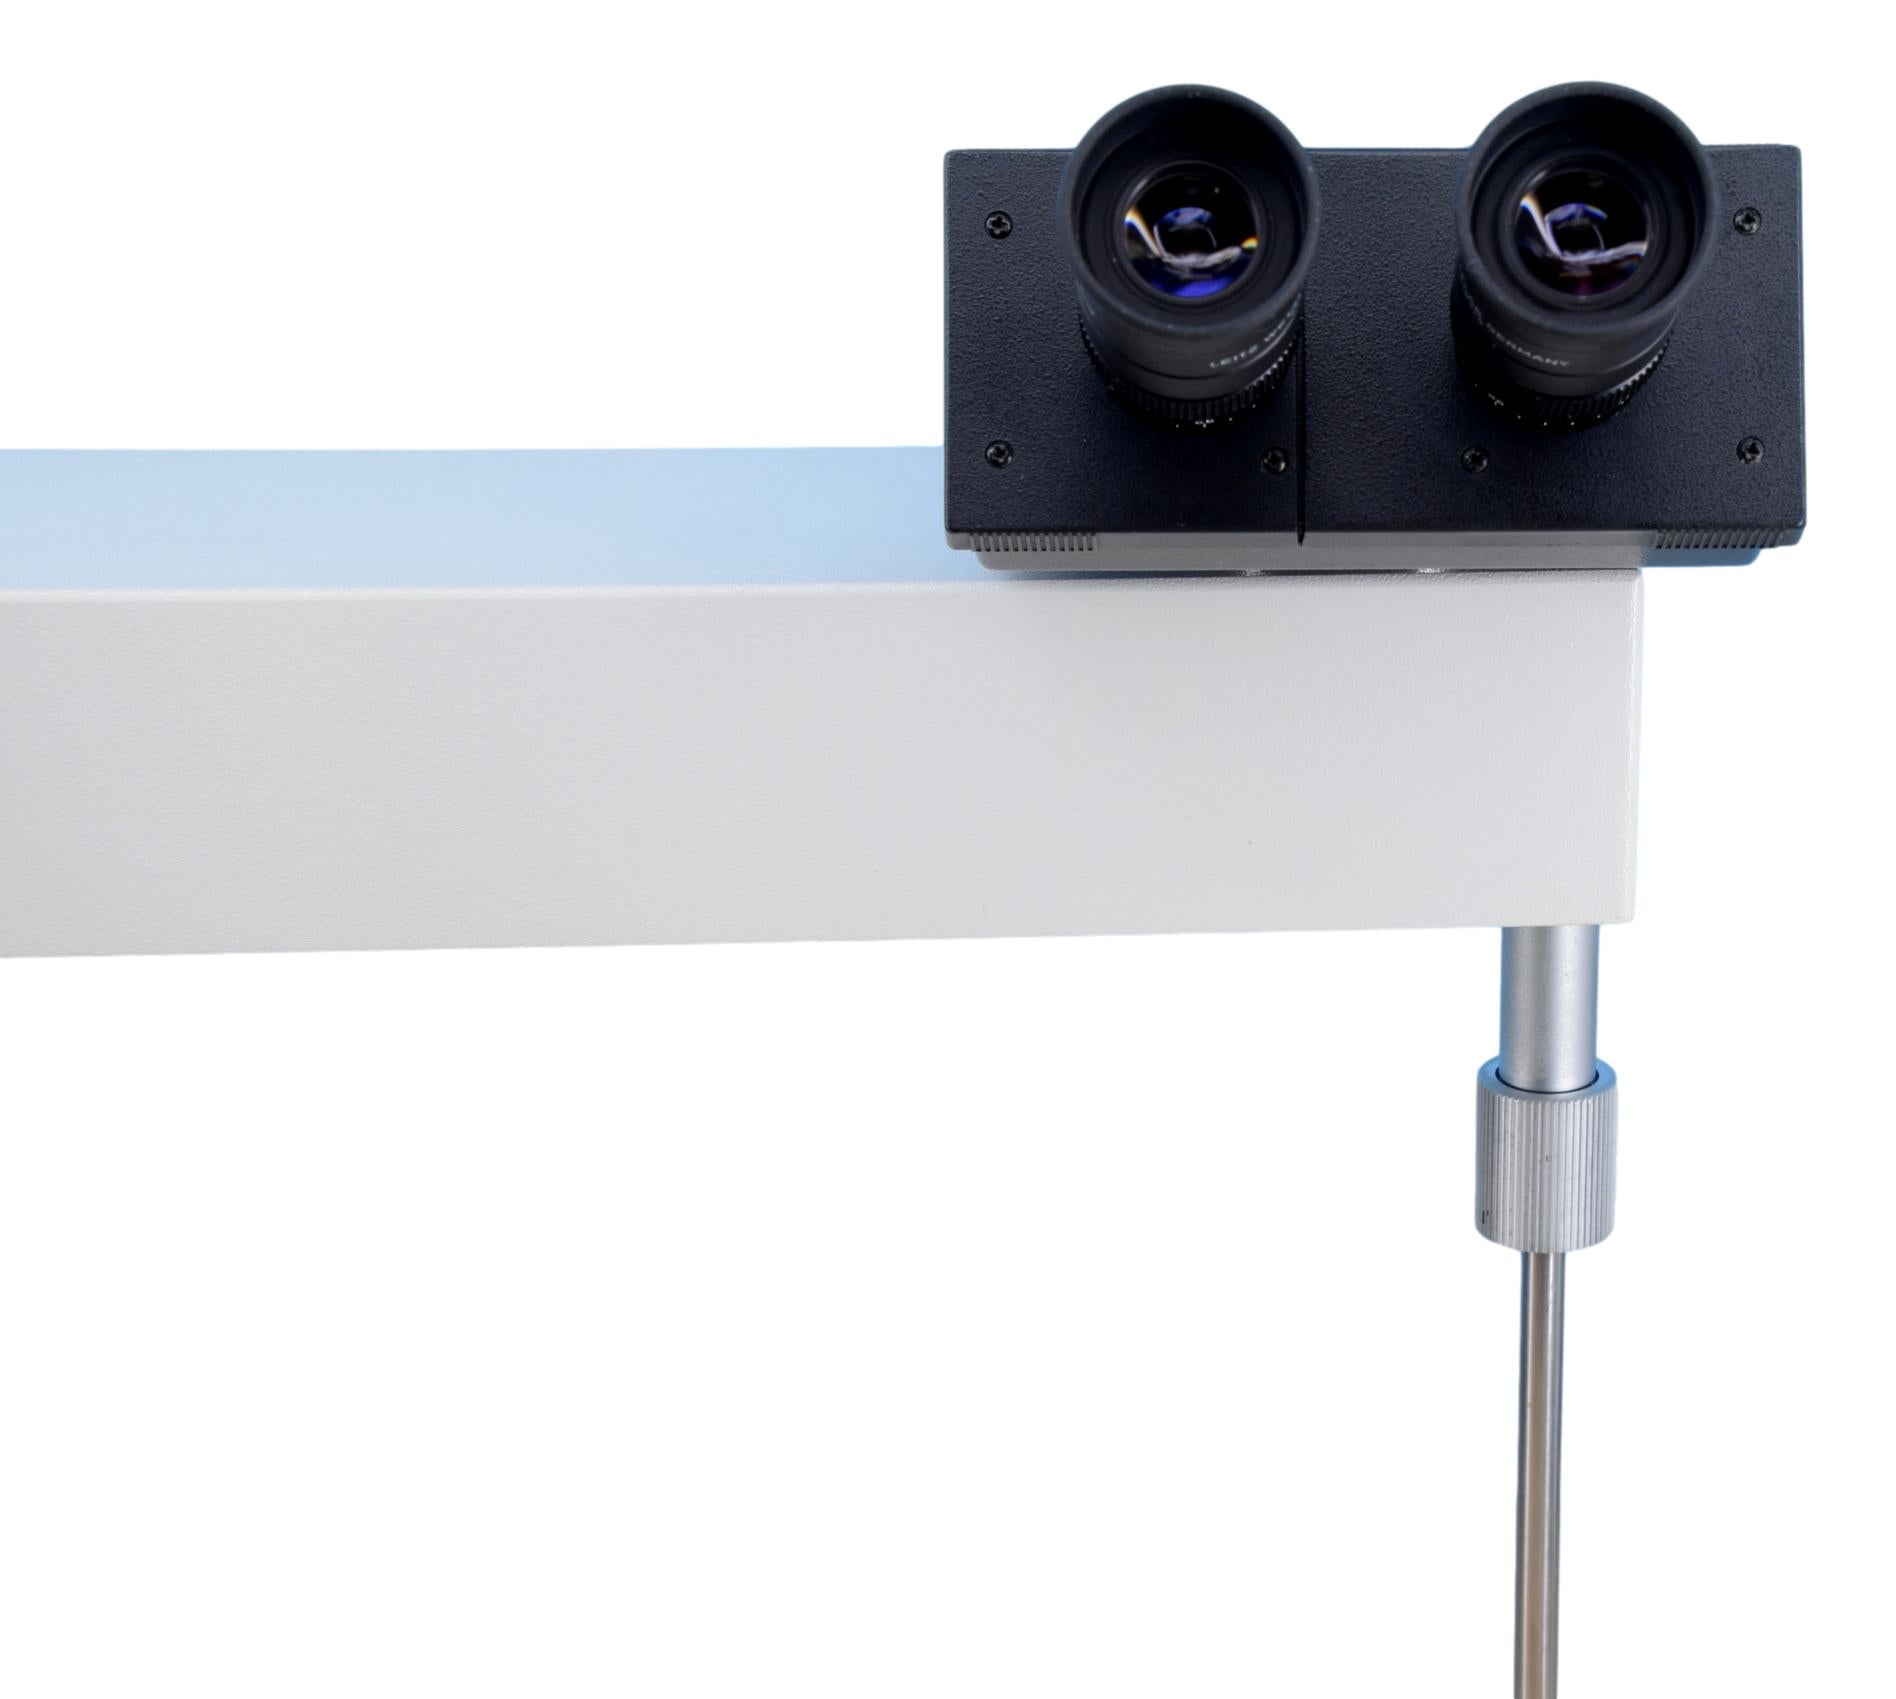 Leitz Laborlux S Dual Viewing Microscope